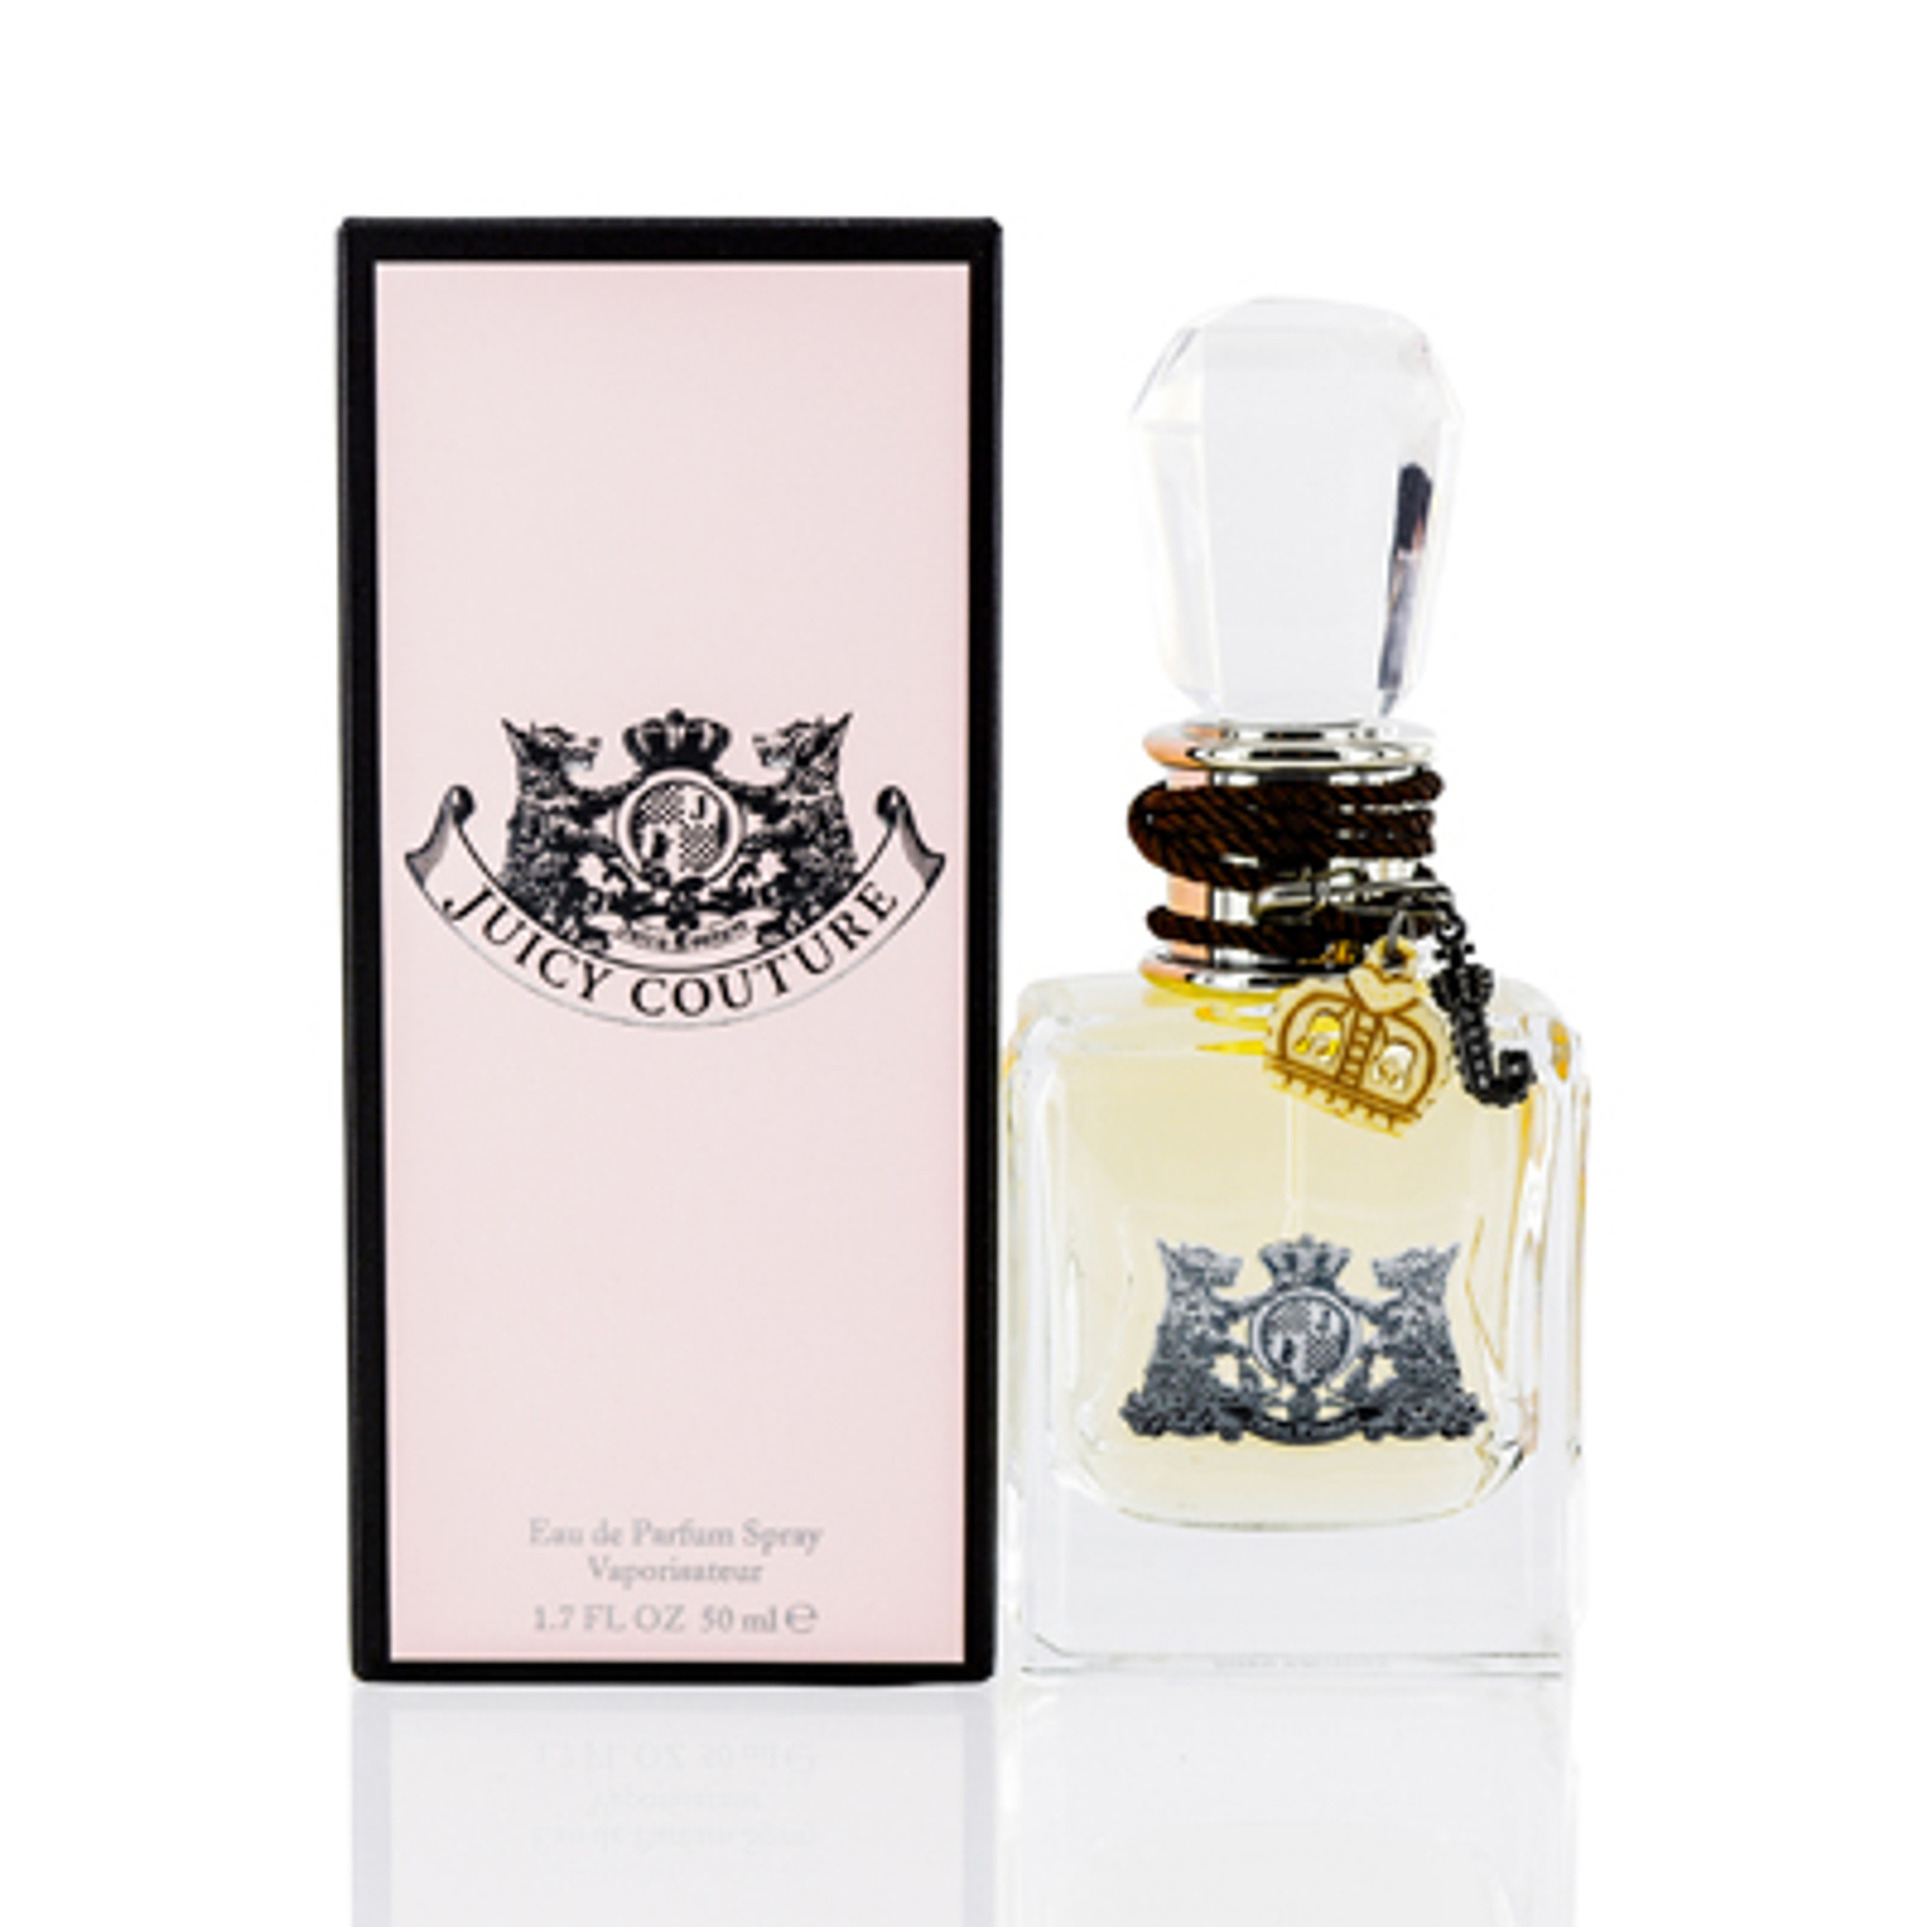 JUICY COUTURE/JUICY COUTURE EDP SPRAY 1.7 OZ (W)